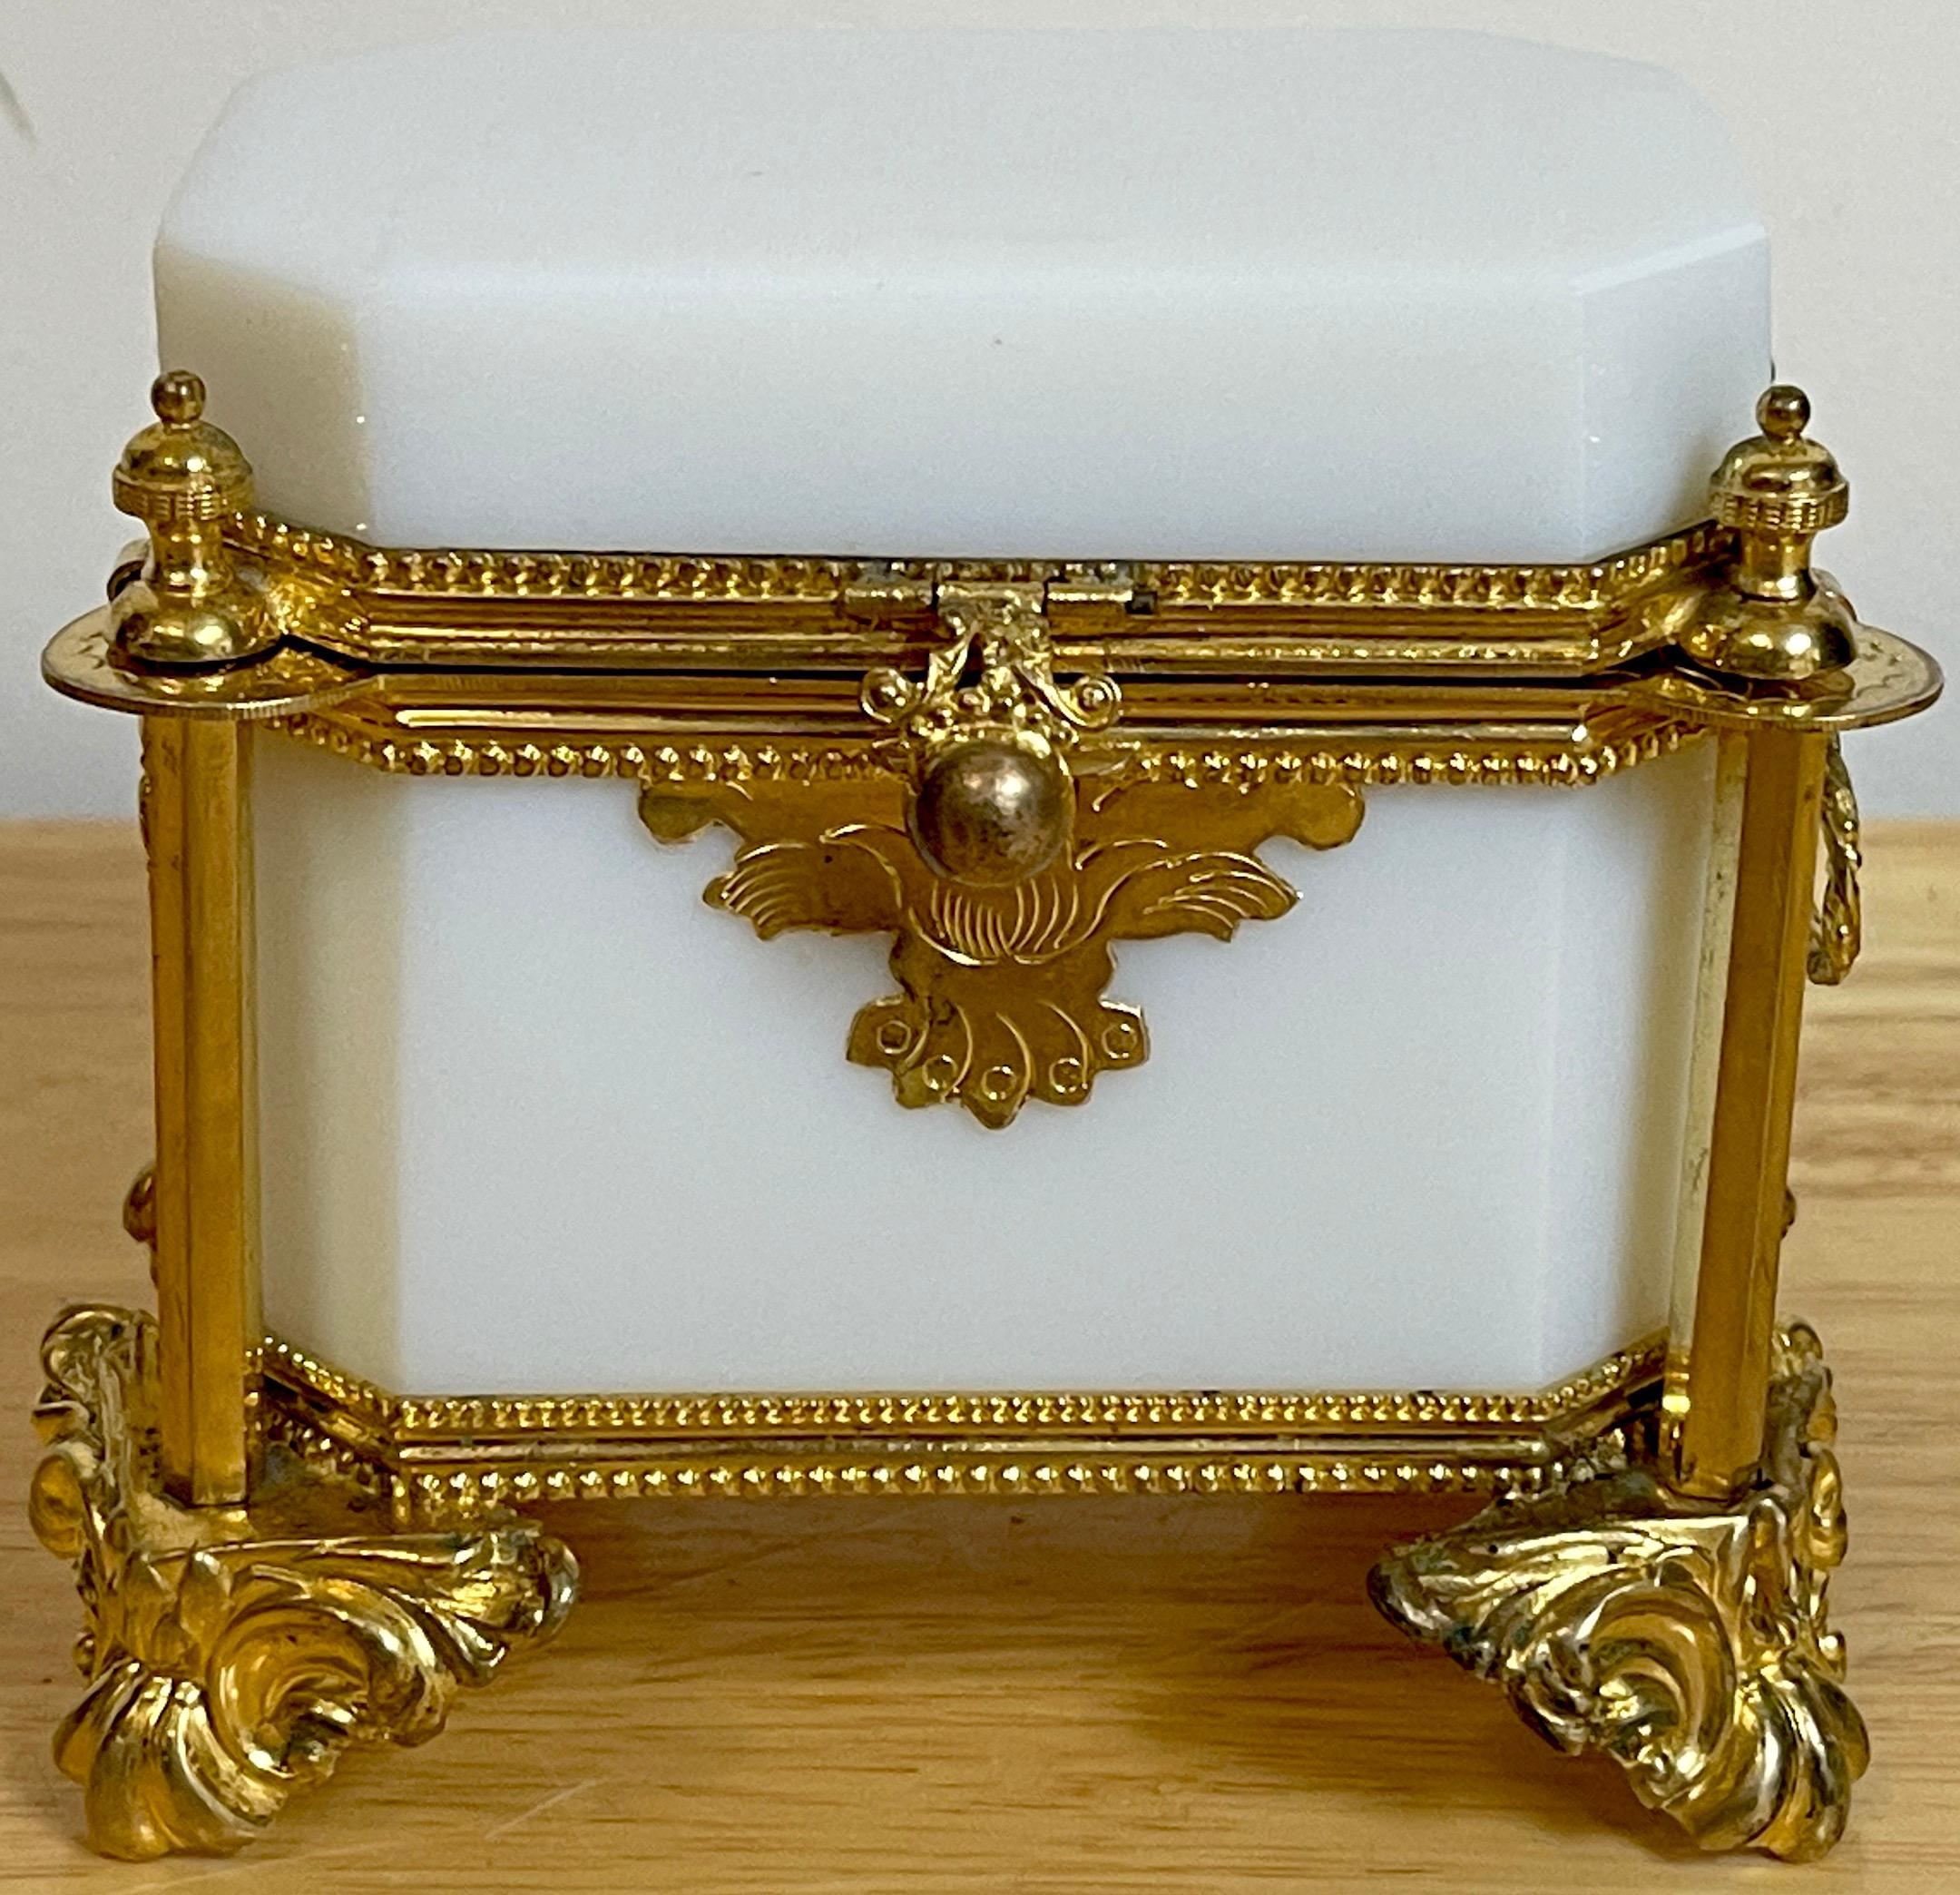 High Victorian Exquisite French Ormolu Mounted White Opaline Diminutive Box, C 1865